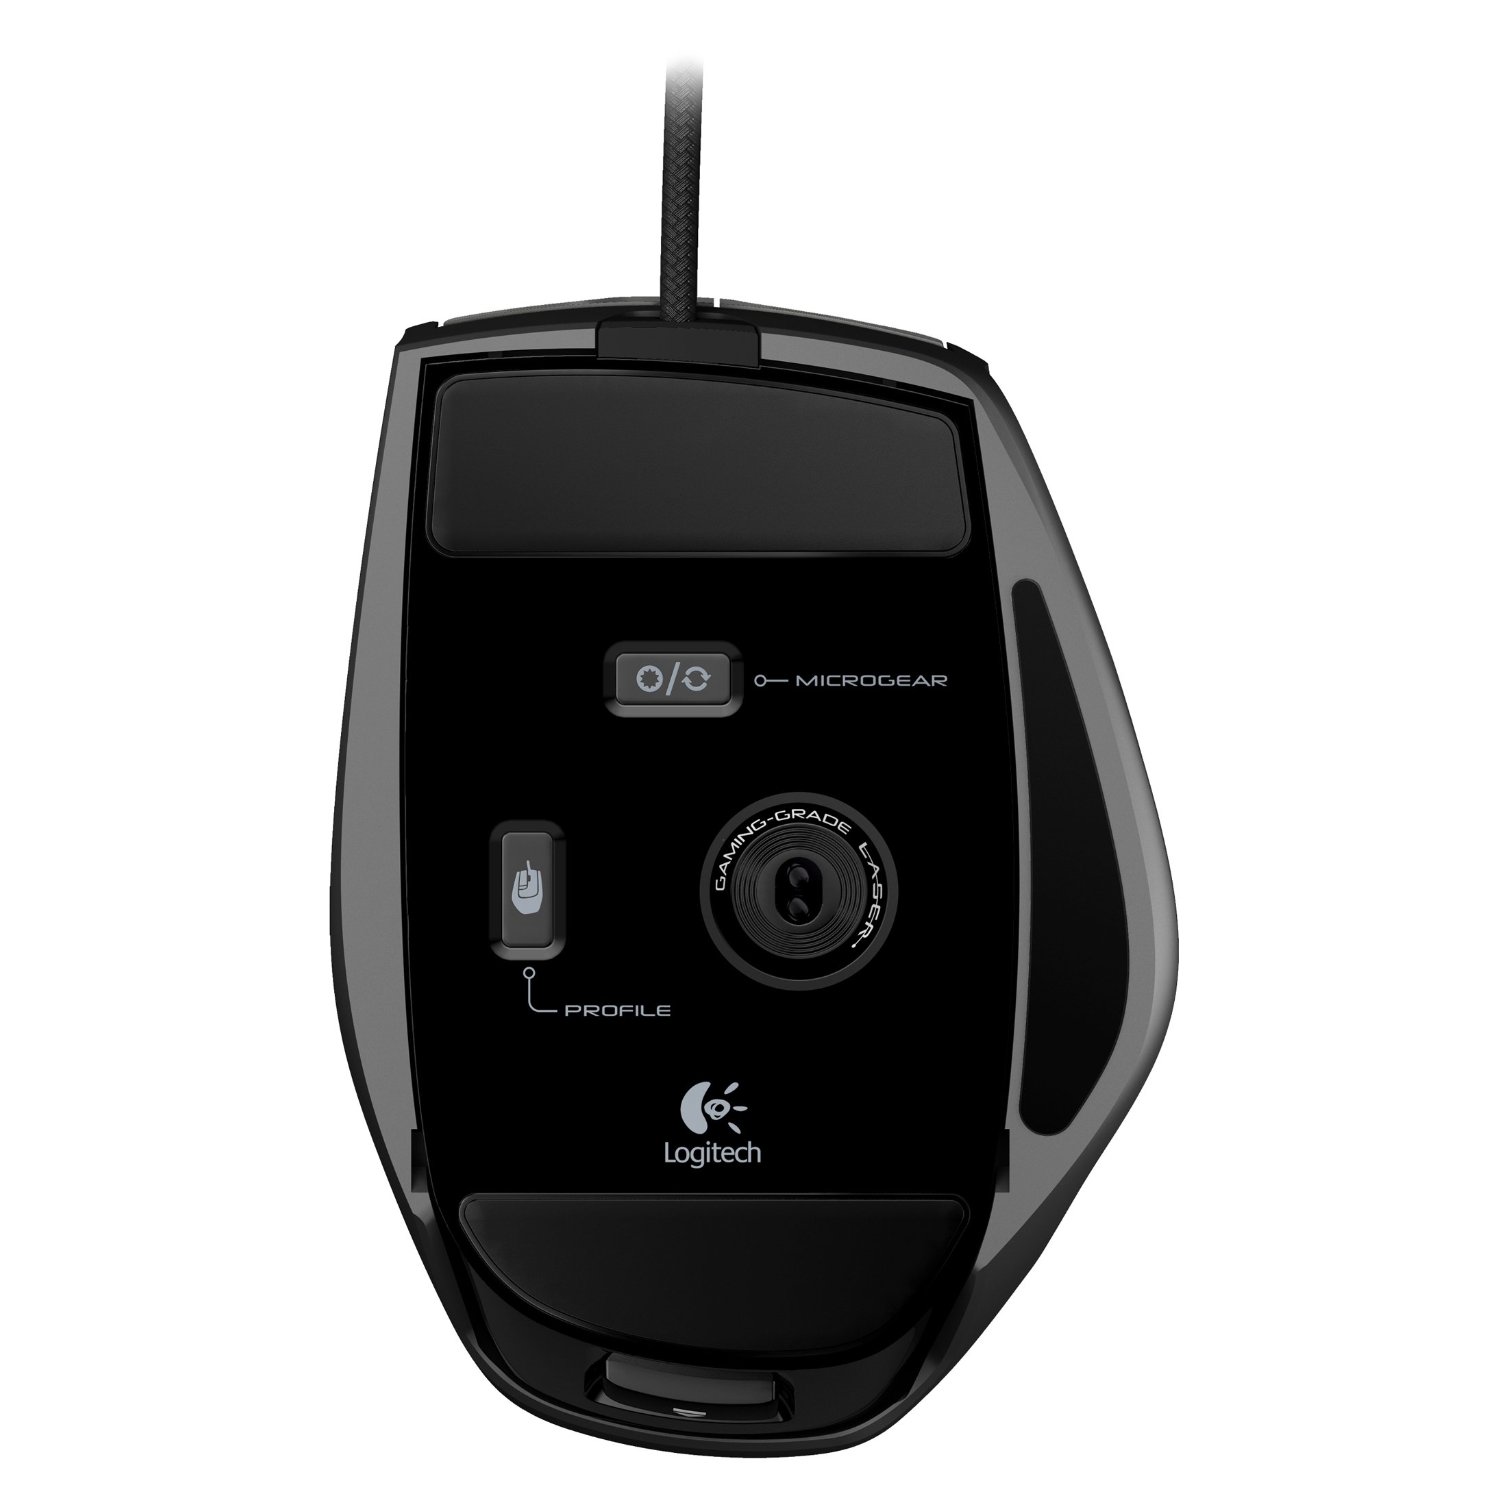 http://thetechjournal.com/wp-content/uploads/images/1111/1321182752-logitech-g9x-programmable-laser-gaming-mouse-12.jpg